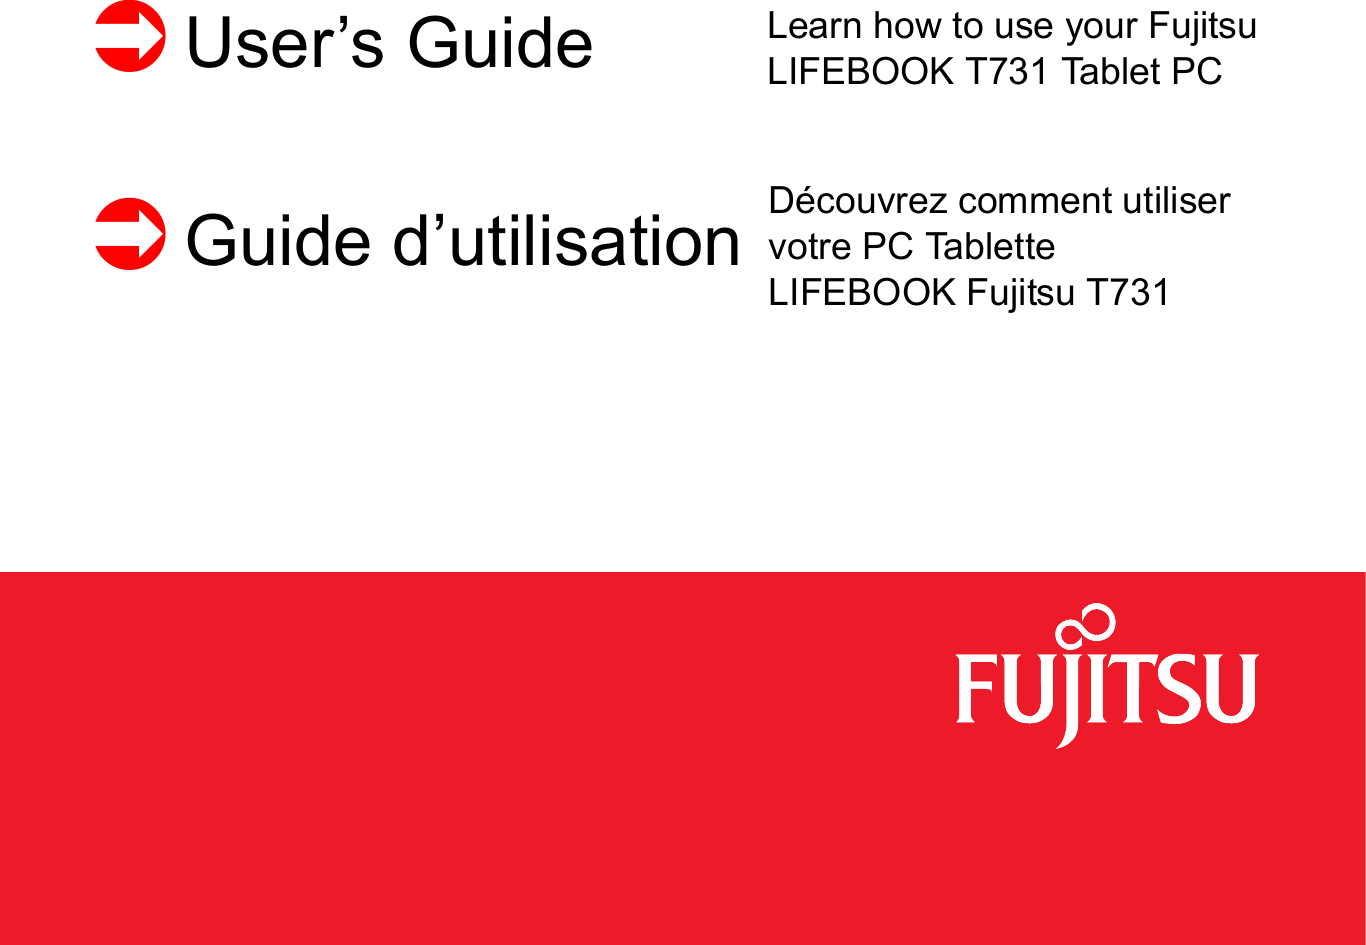  User’s Guide Learn how to use your Fujitsu LIFEBOOK T731 Tablet PCGuide d’utilisation Découvrez comment utiliser votre PC Tablette LIFEBOOK Fujitsu T731